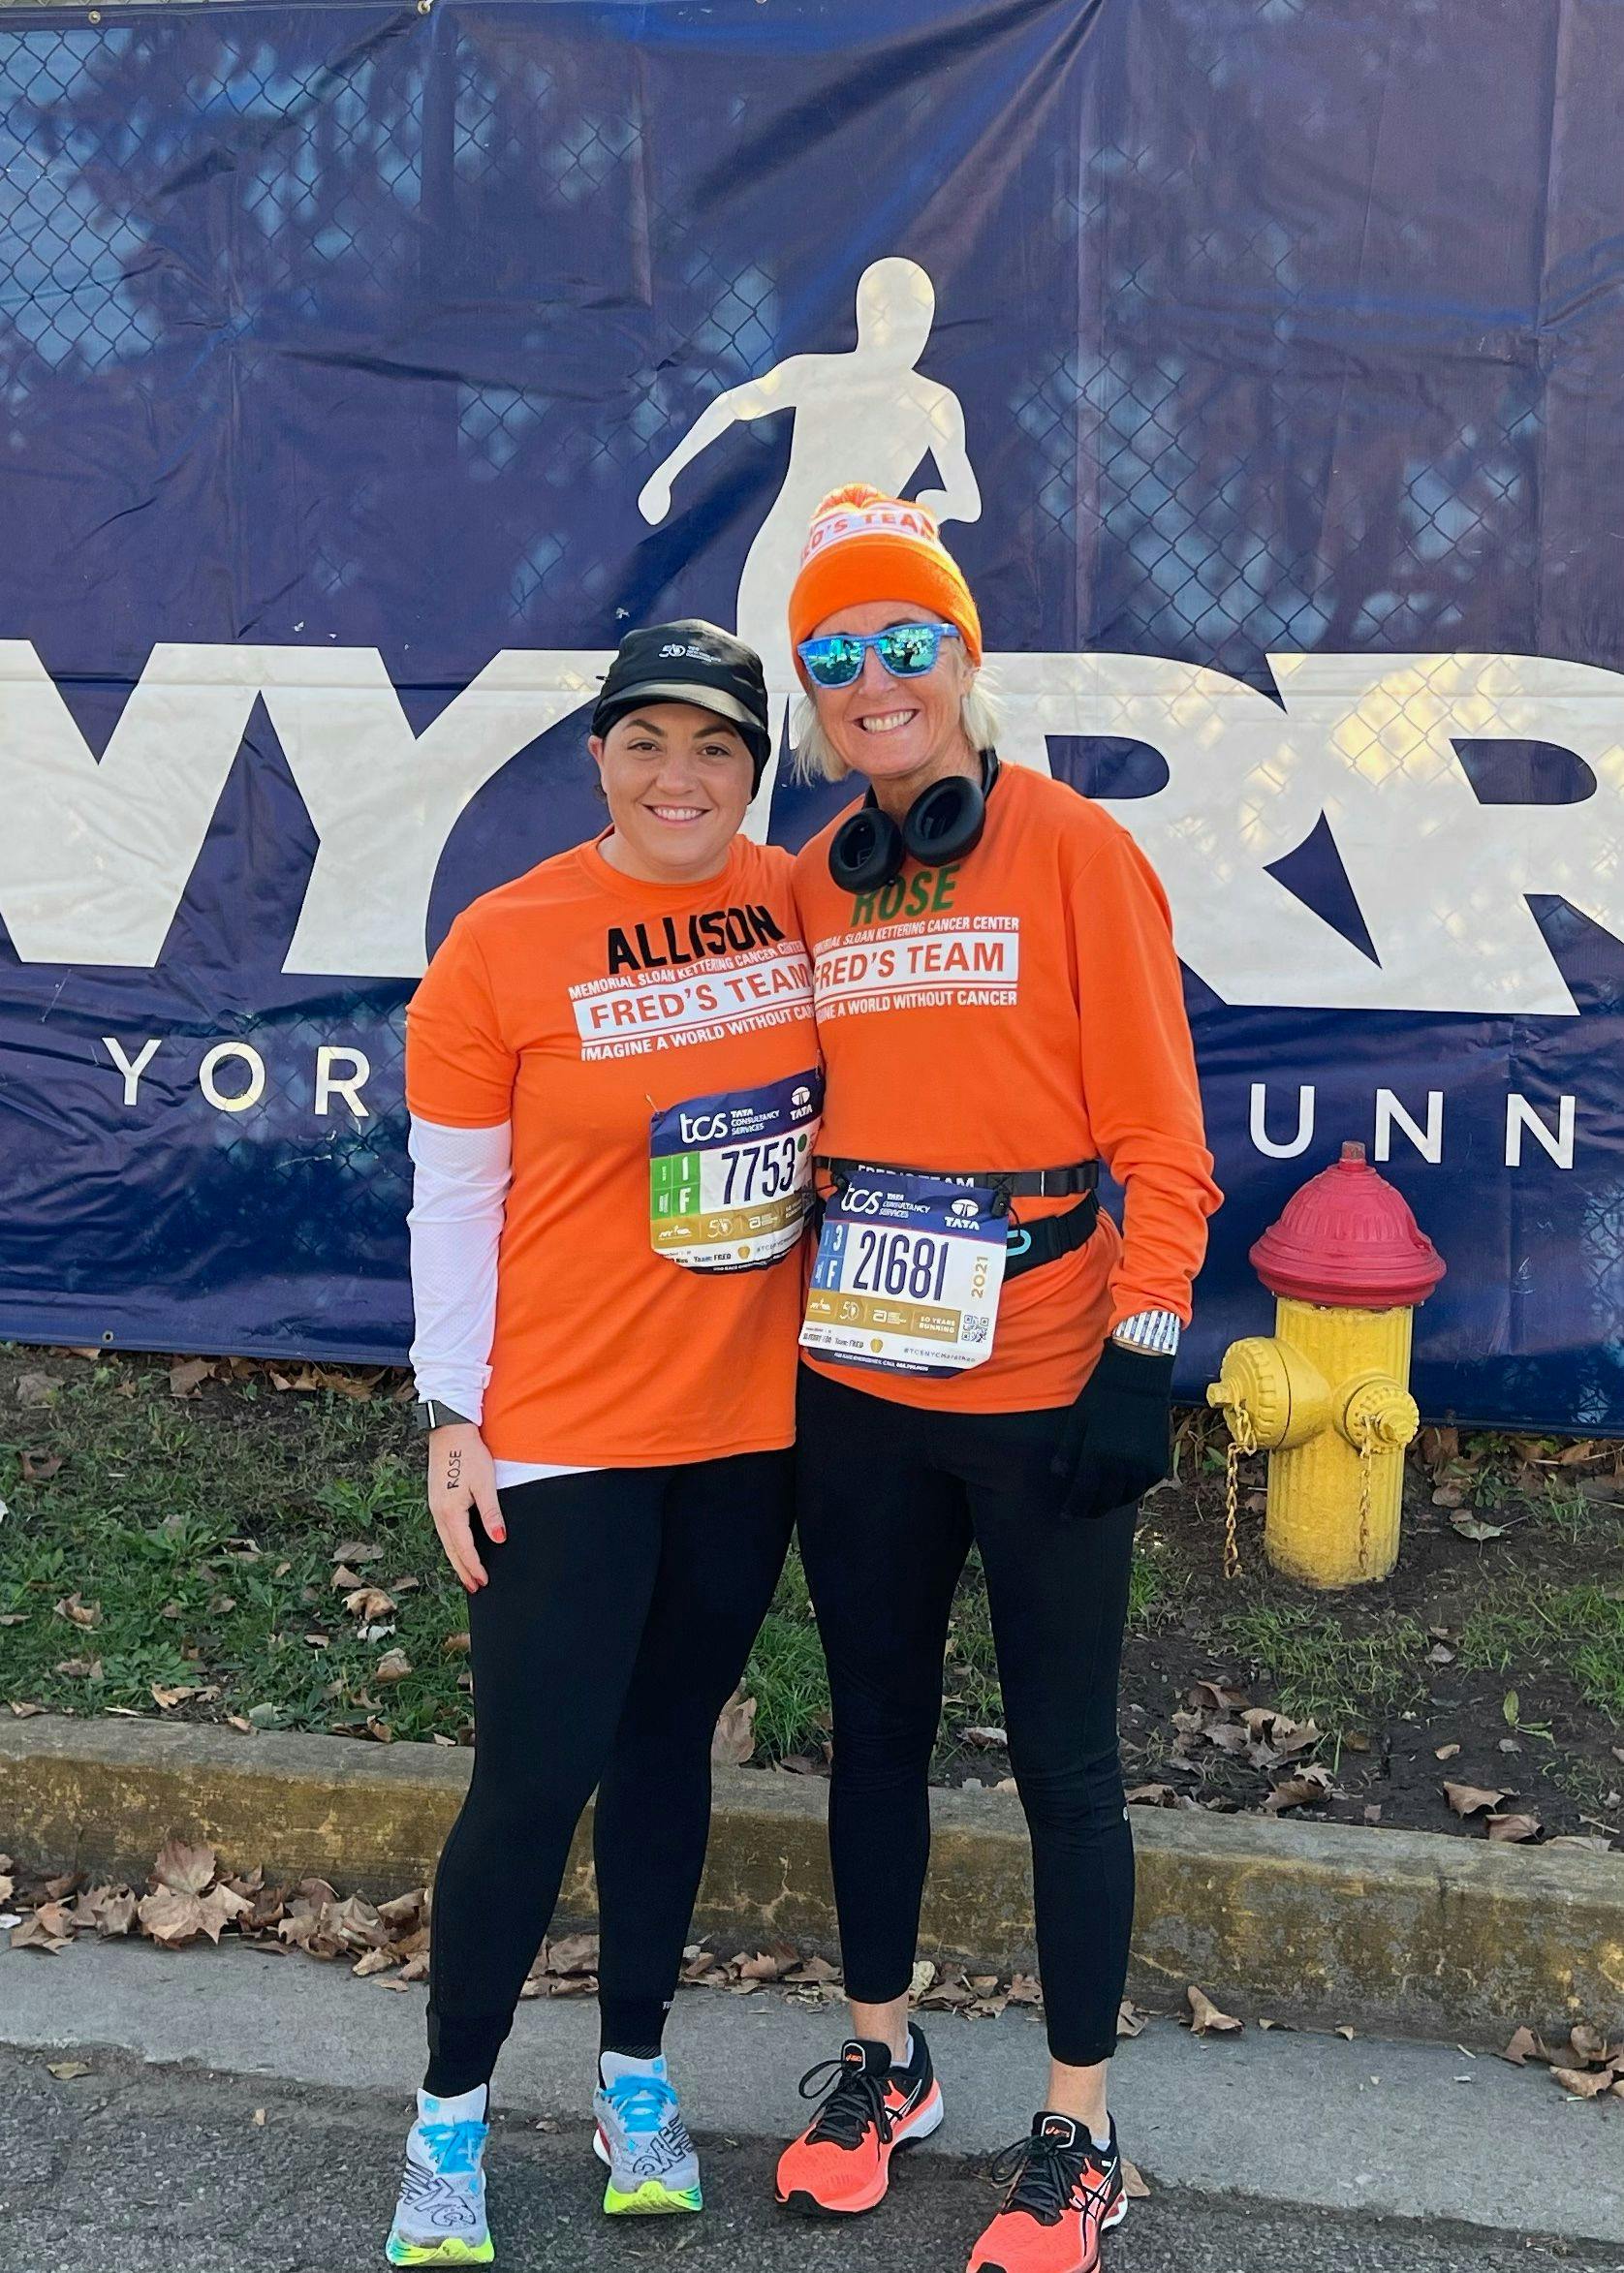 Dr. Allison Betof Warner and Rose Maxfield wearing orange shirts and running gear at the 2021 NYC Marathon